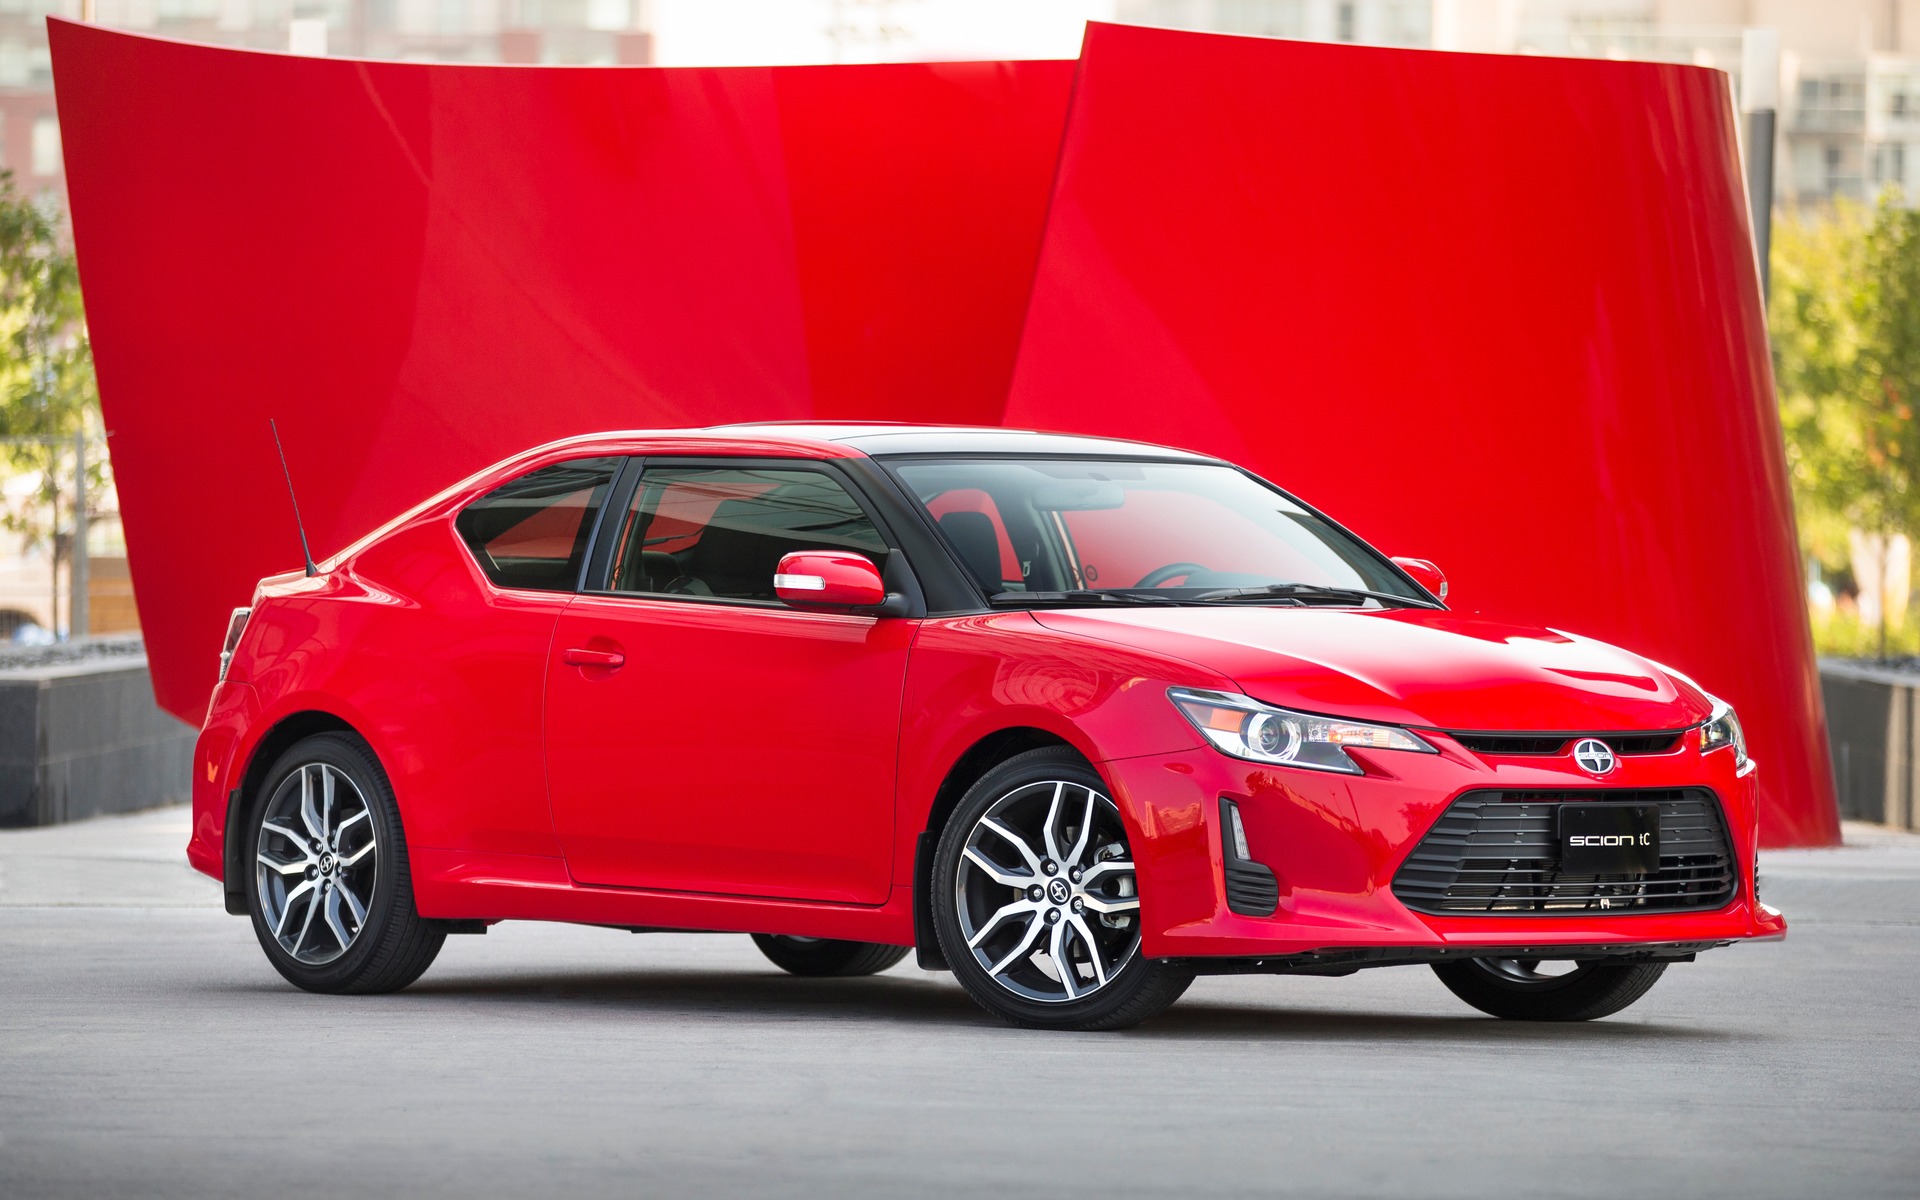 2015 Scion tC: Overshadowed By The FR-S - The Car Guide